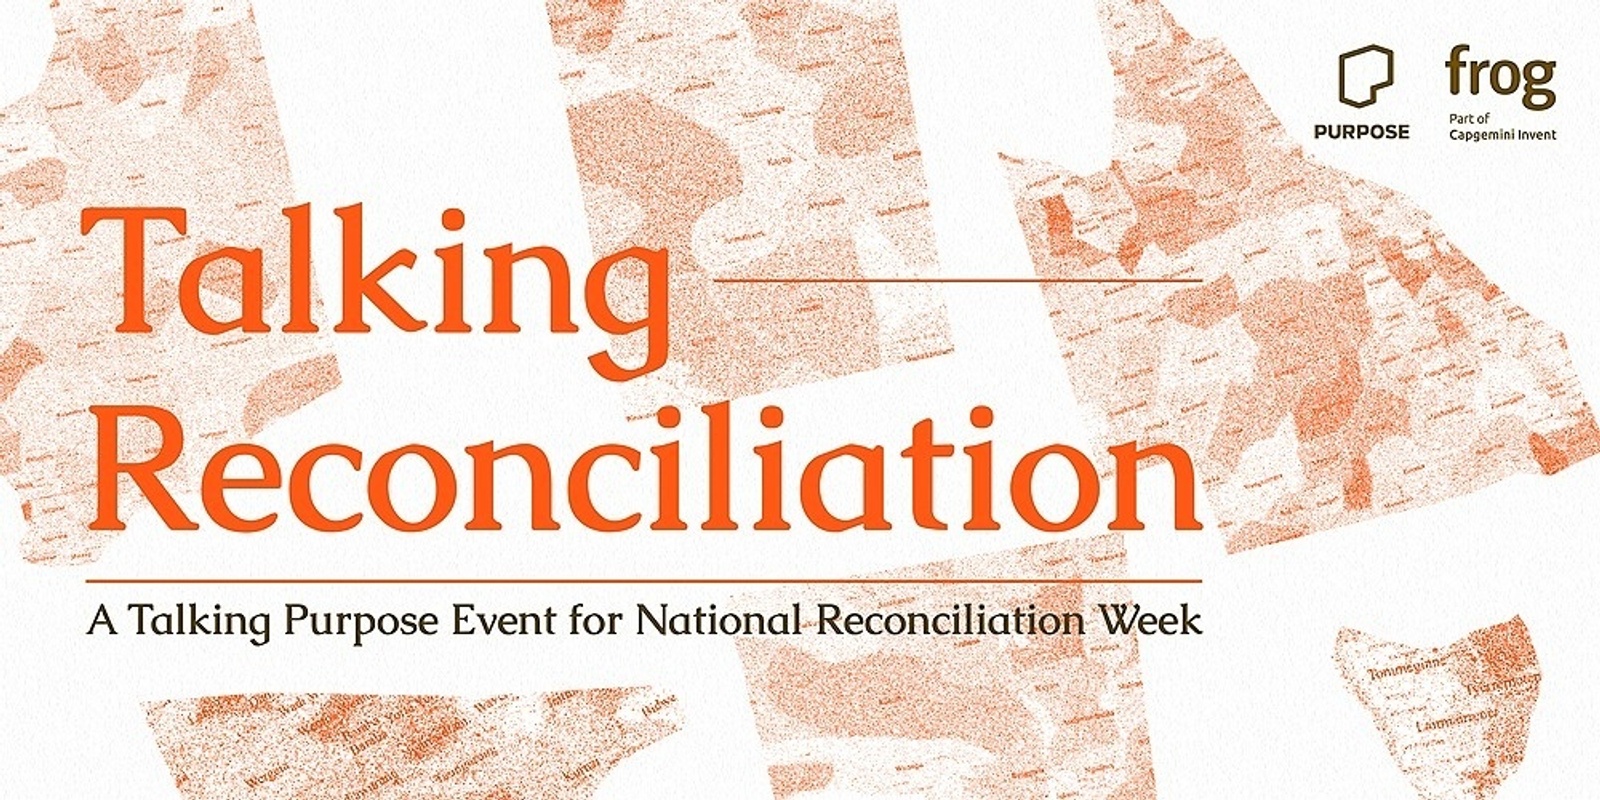 Banner image for Talking Reconciliation 